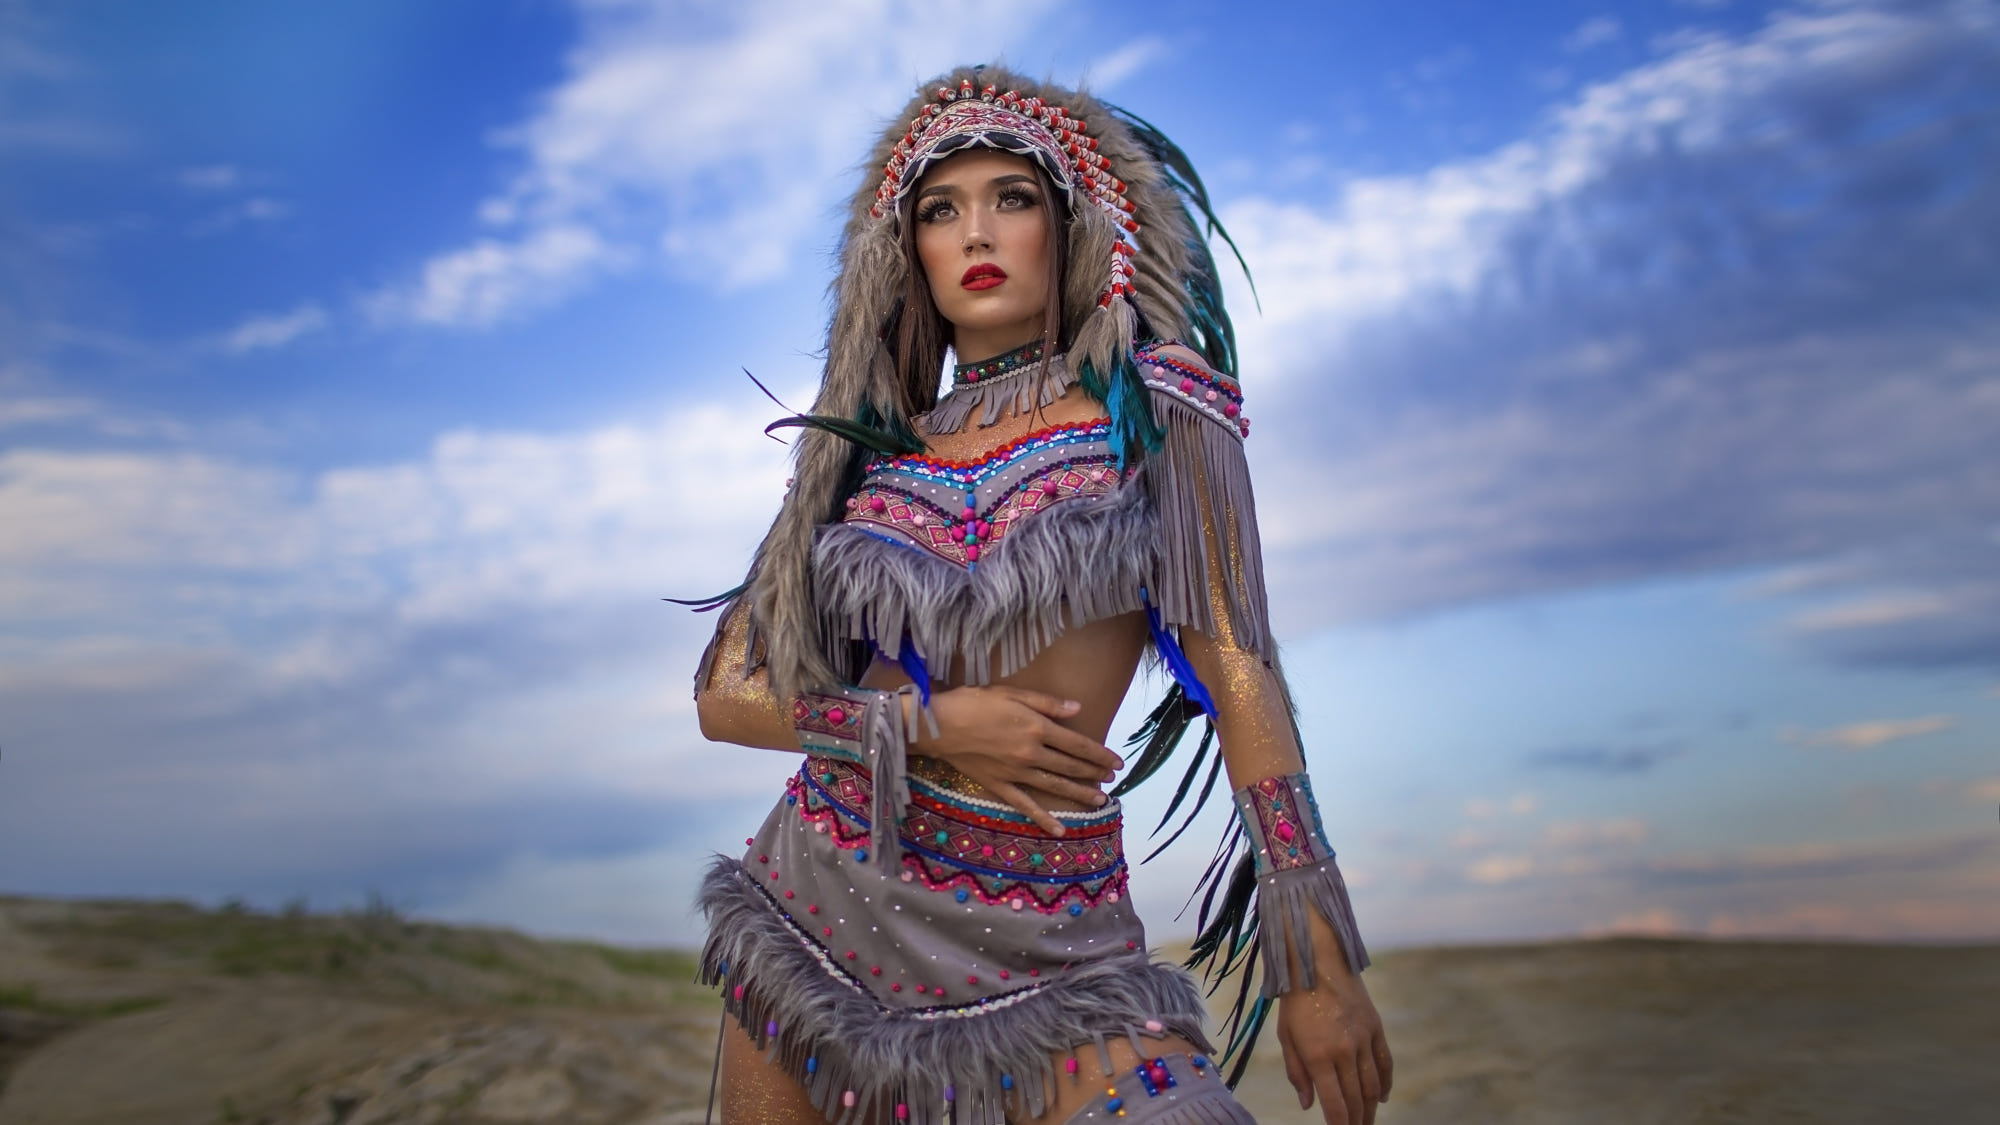 Women Feathers Sky Clouds Red Lipstick Women Outdoors Native American Clothing 2000x1125